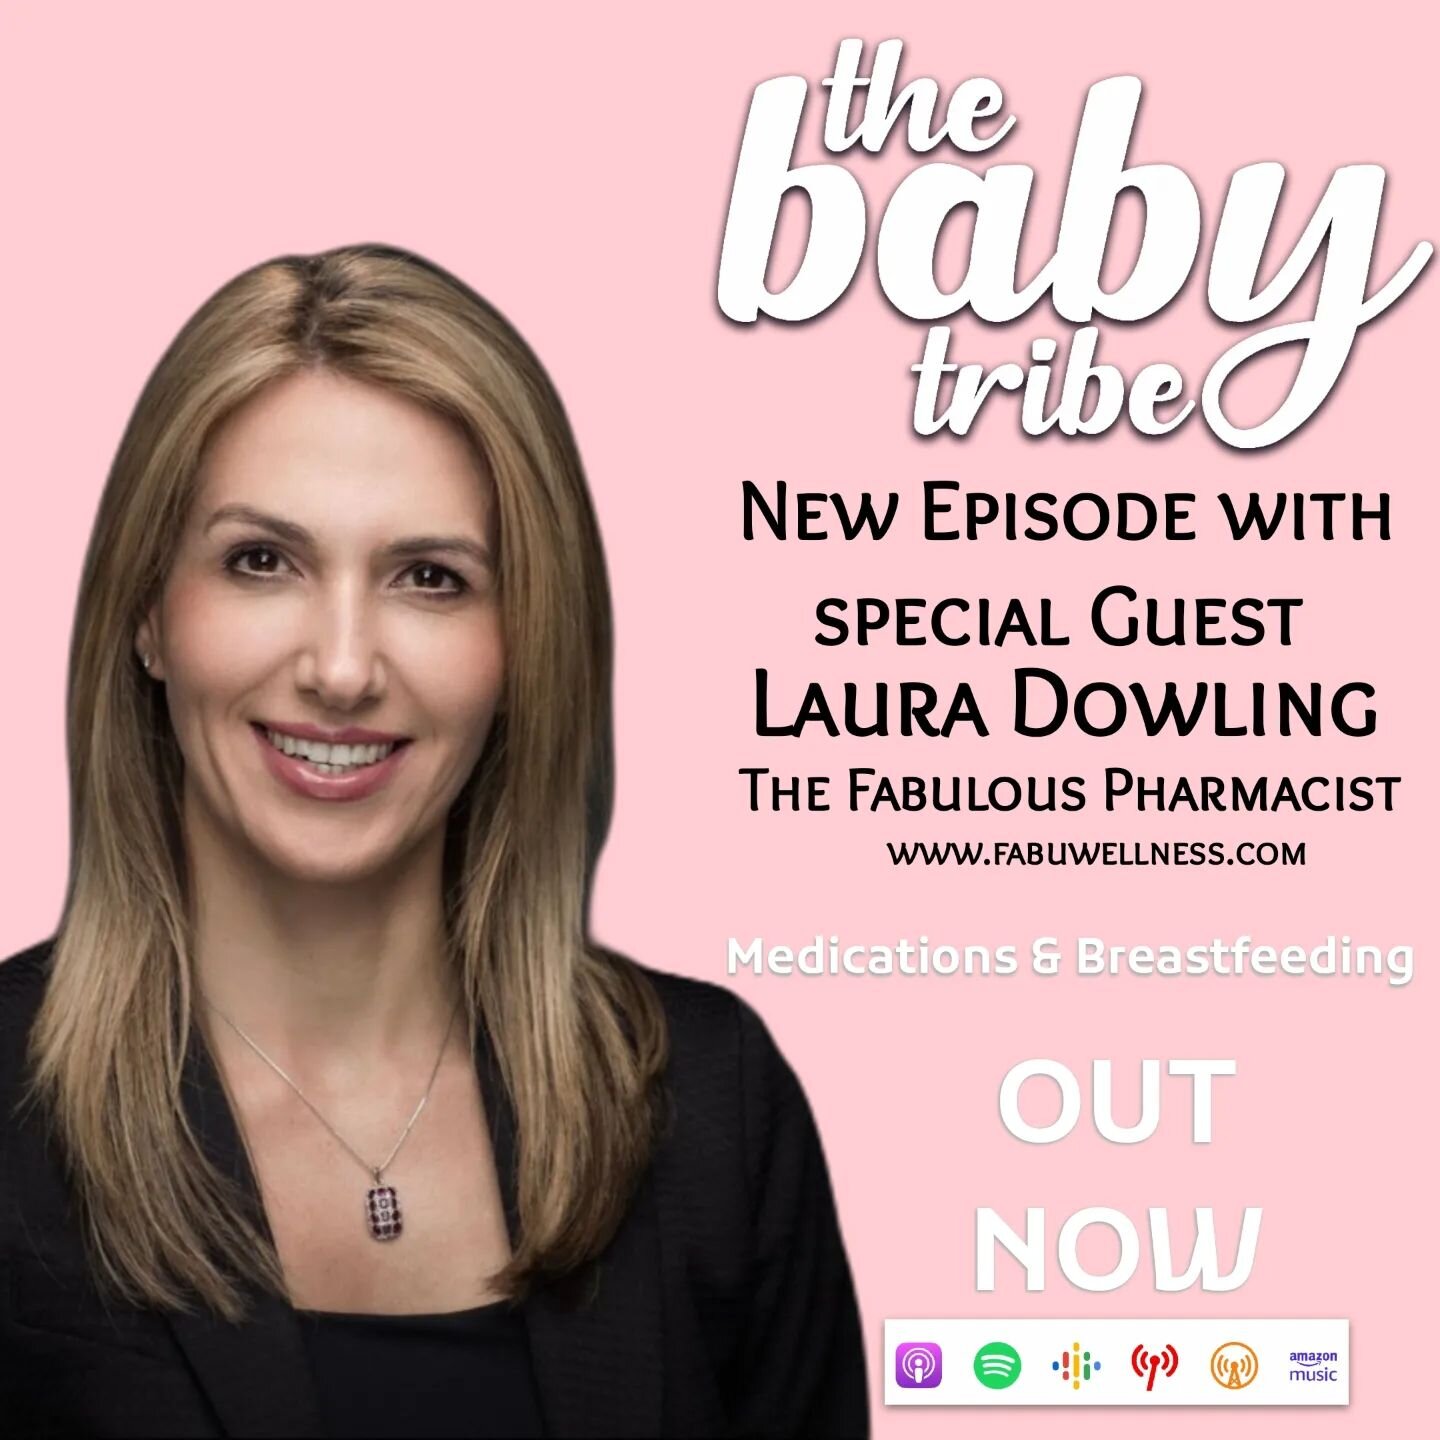 We are delighted to have @fabulouspharmacist Laura Dowling as a special guest on the Baby Tribe Podcast today. Laura is an inspiration and a wealth of knowledge. We discuss medications and Breastfeeding in addition to other parenting topics in today'